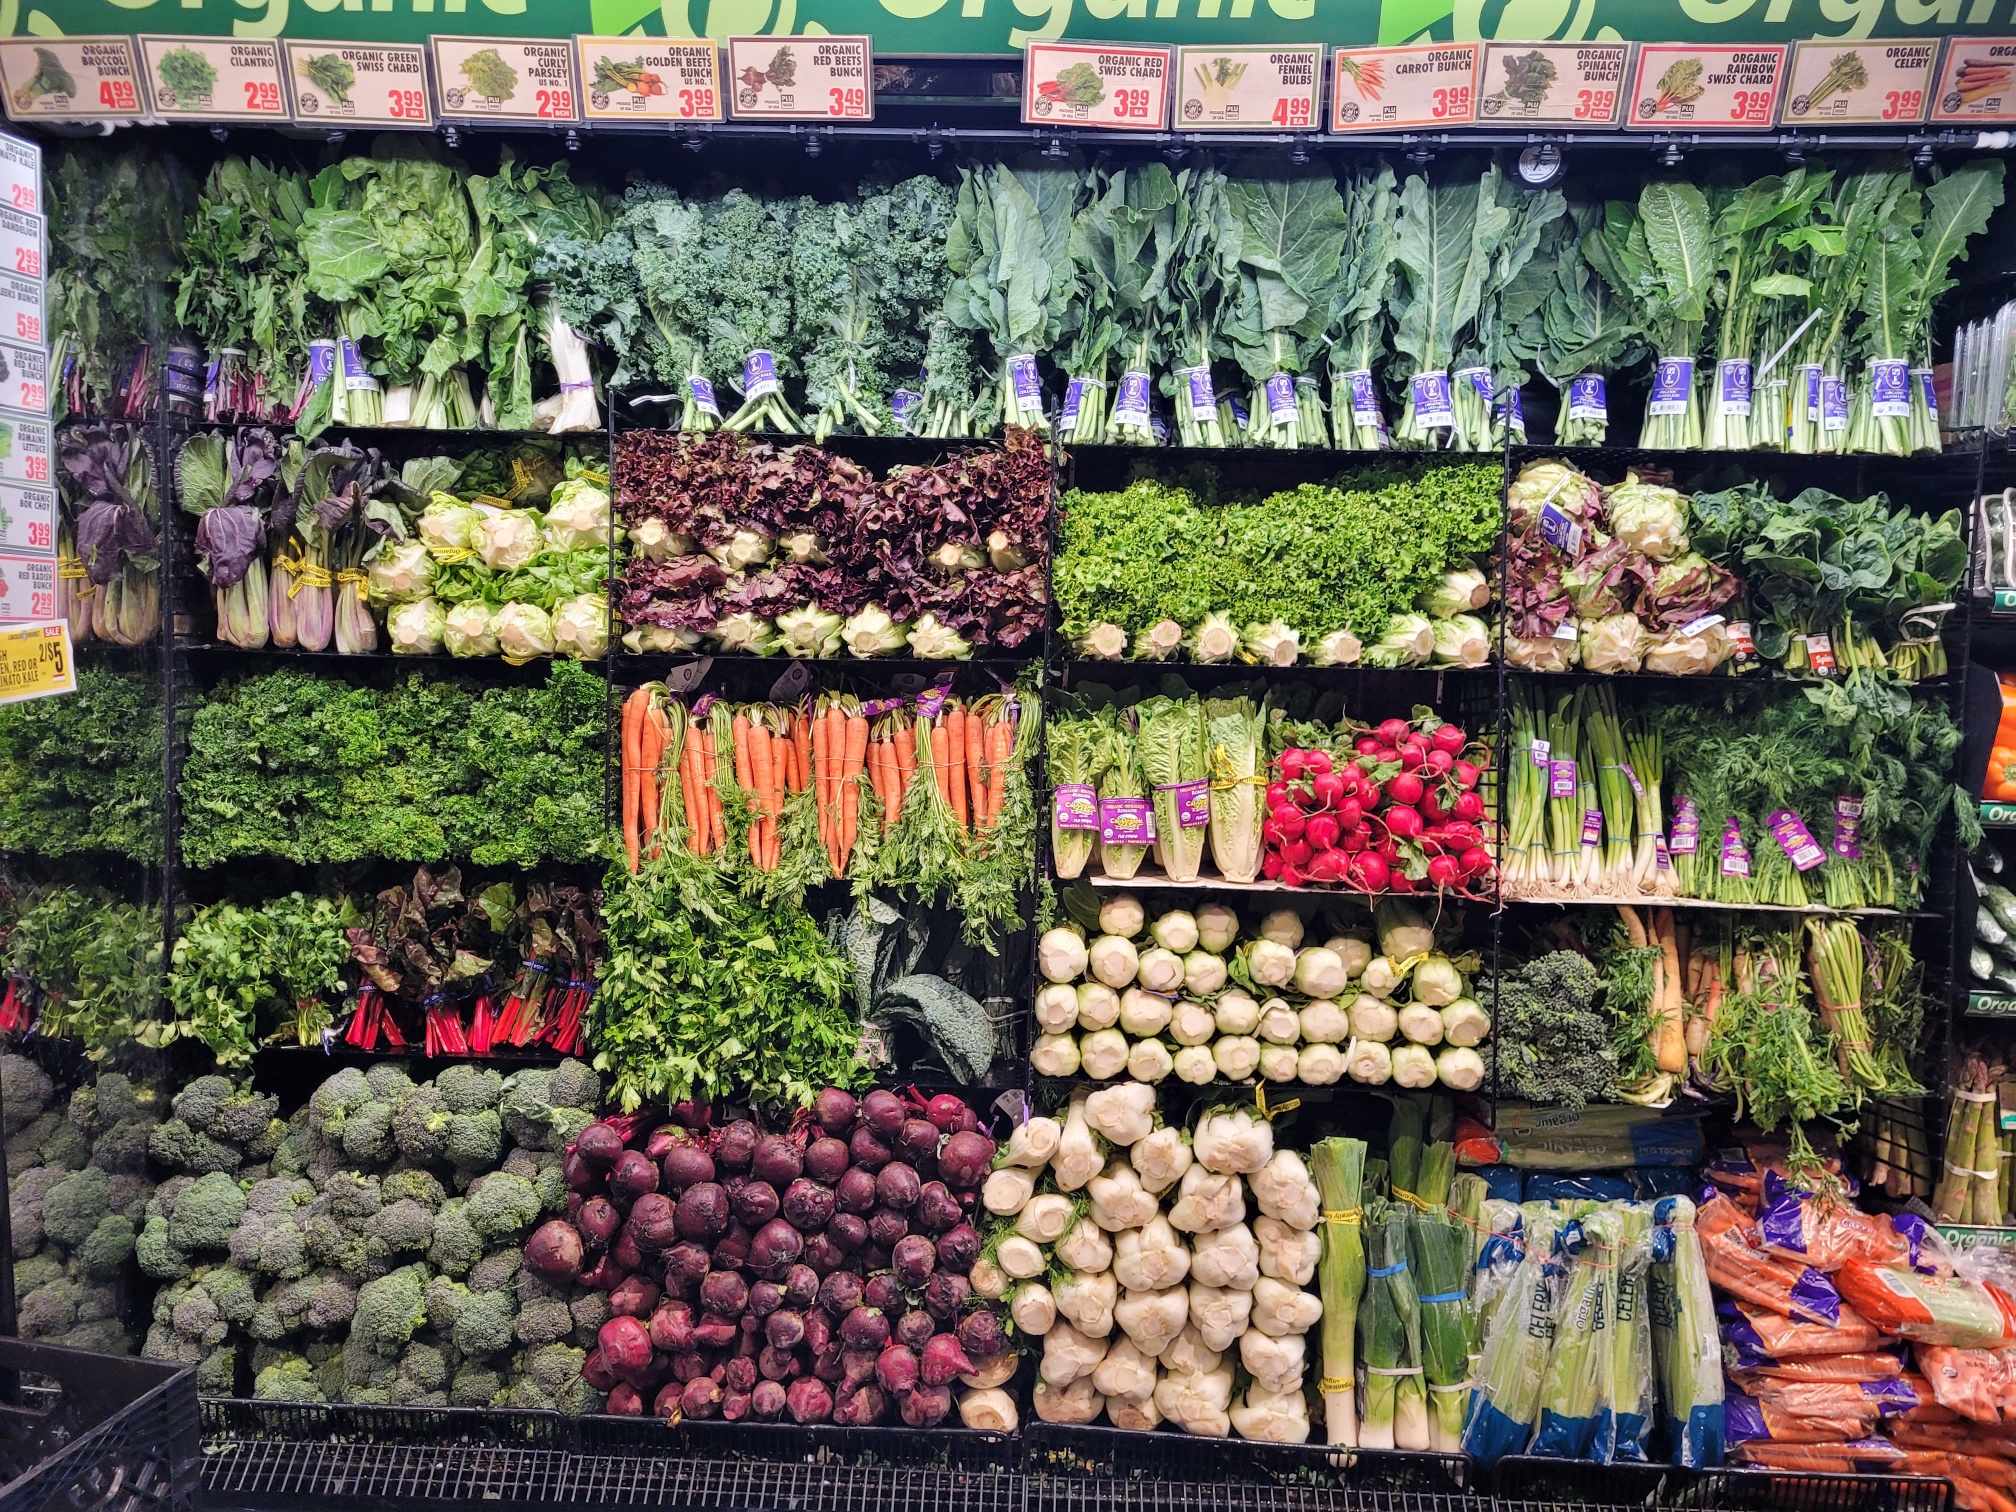 In-store photo of vegetables